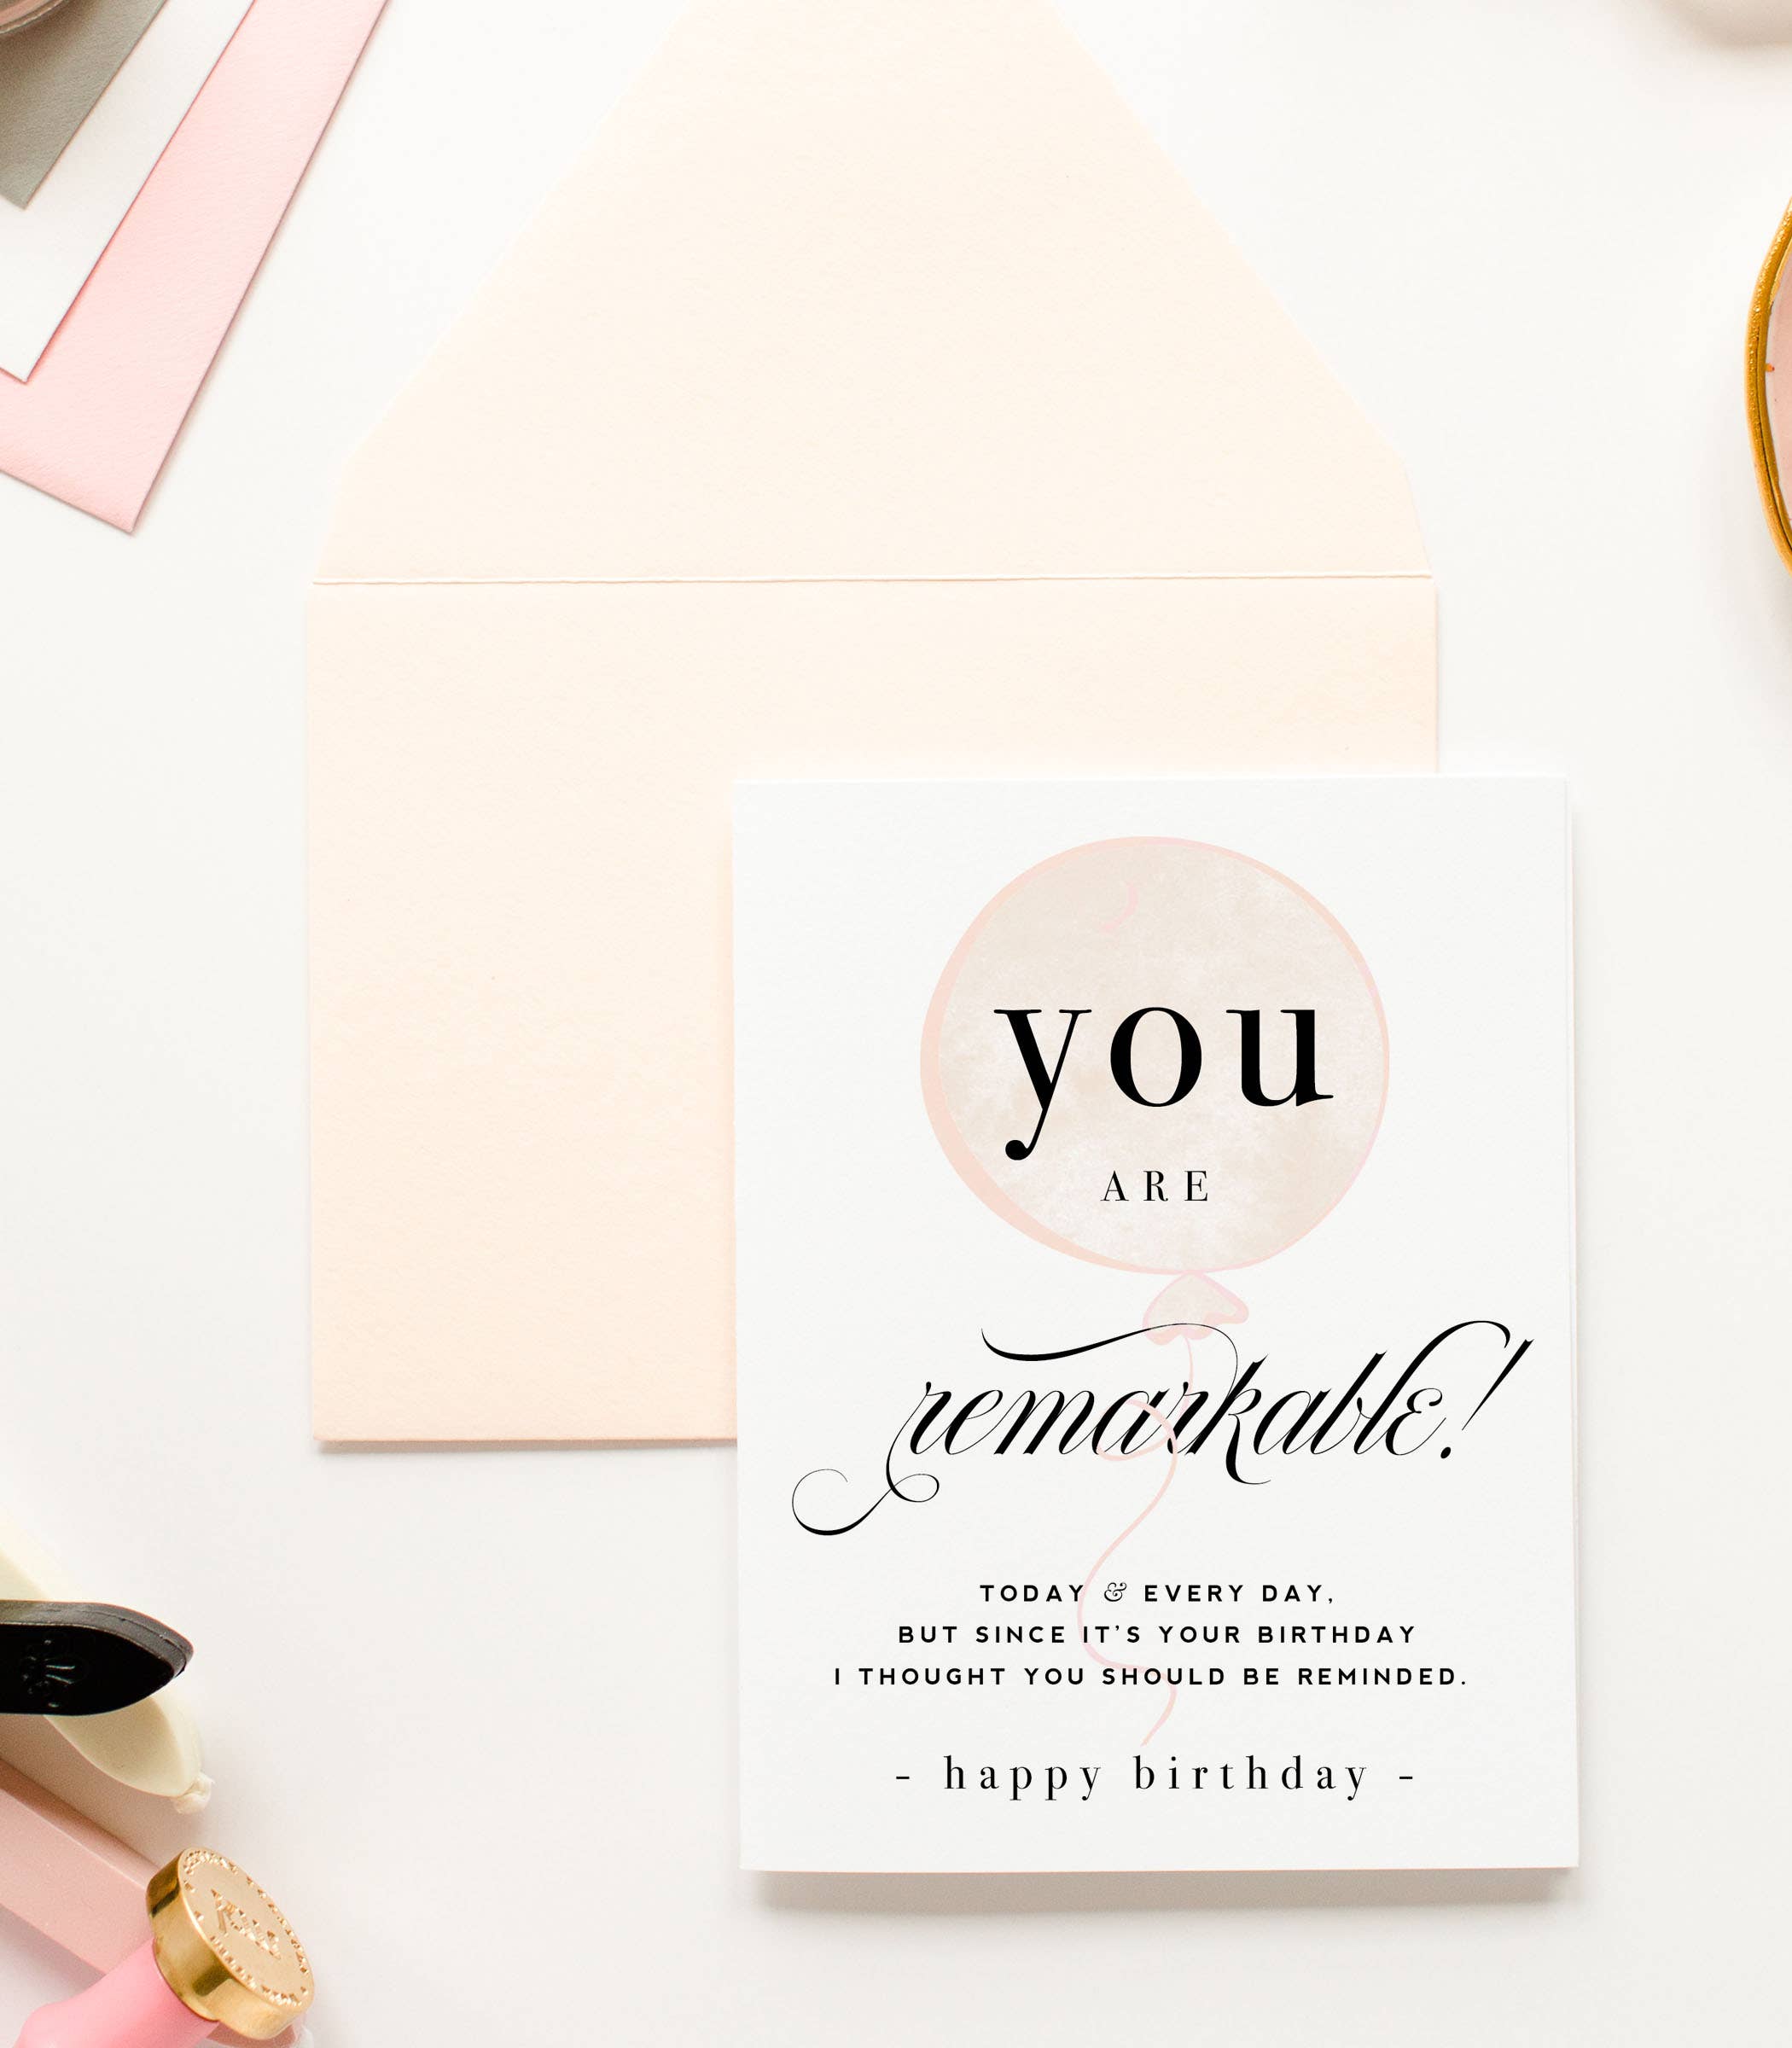 You Are Remarkable - Sweet Birthday Greeting Card